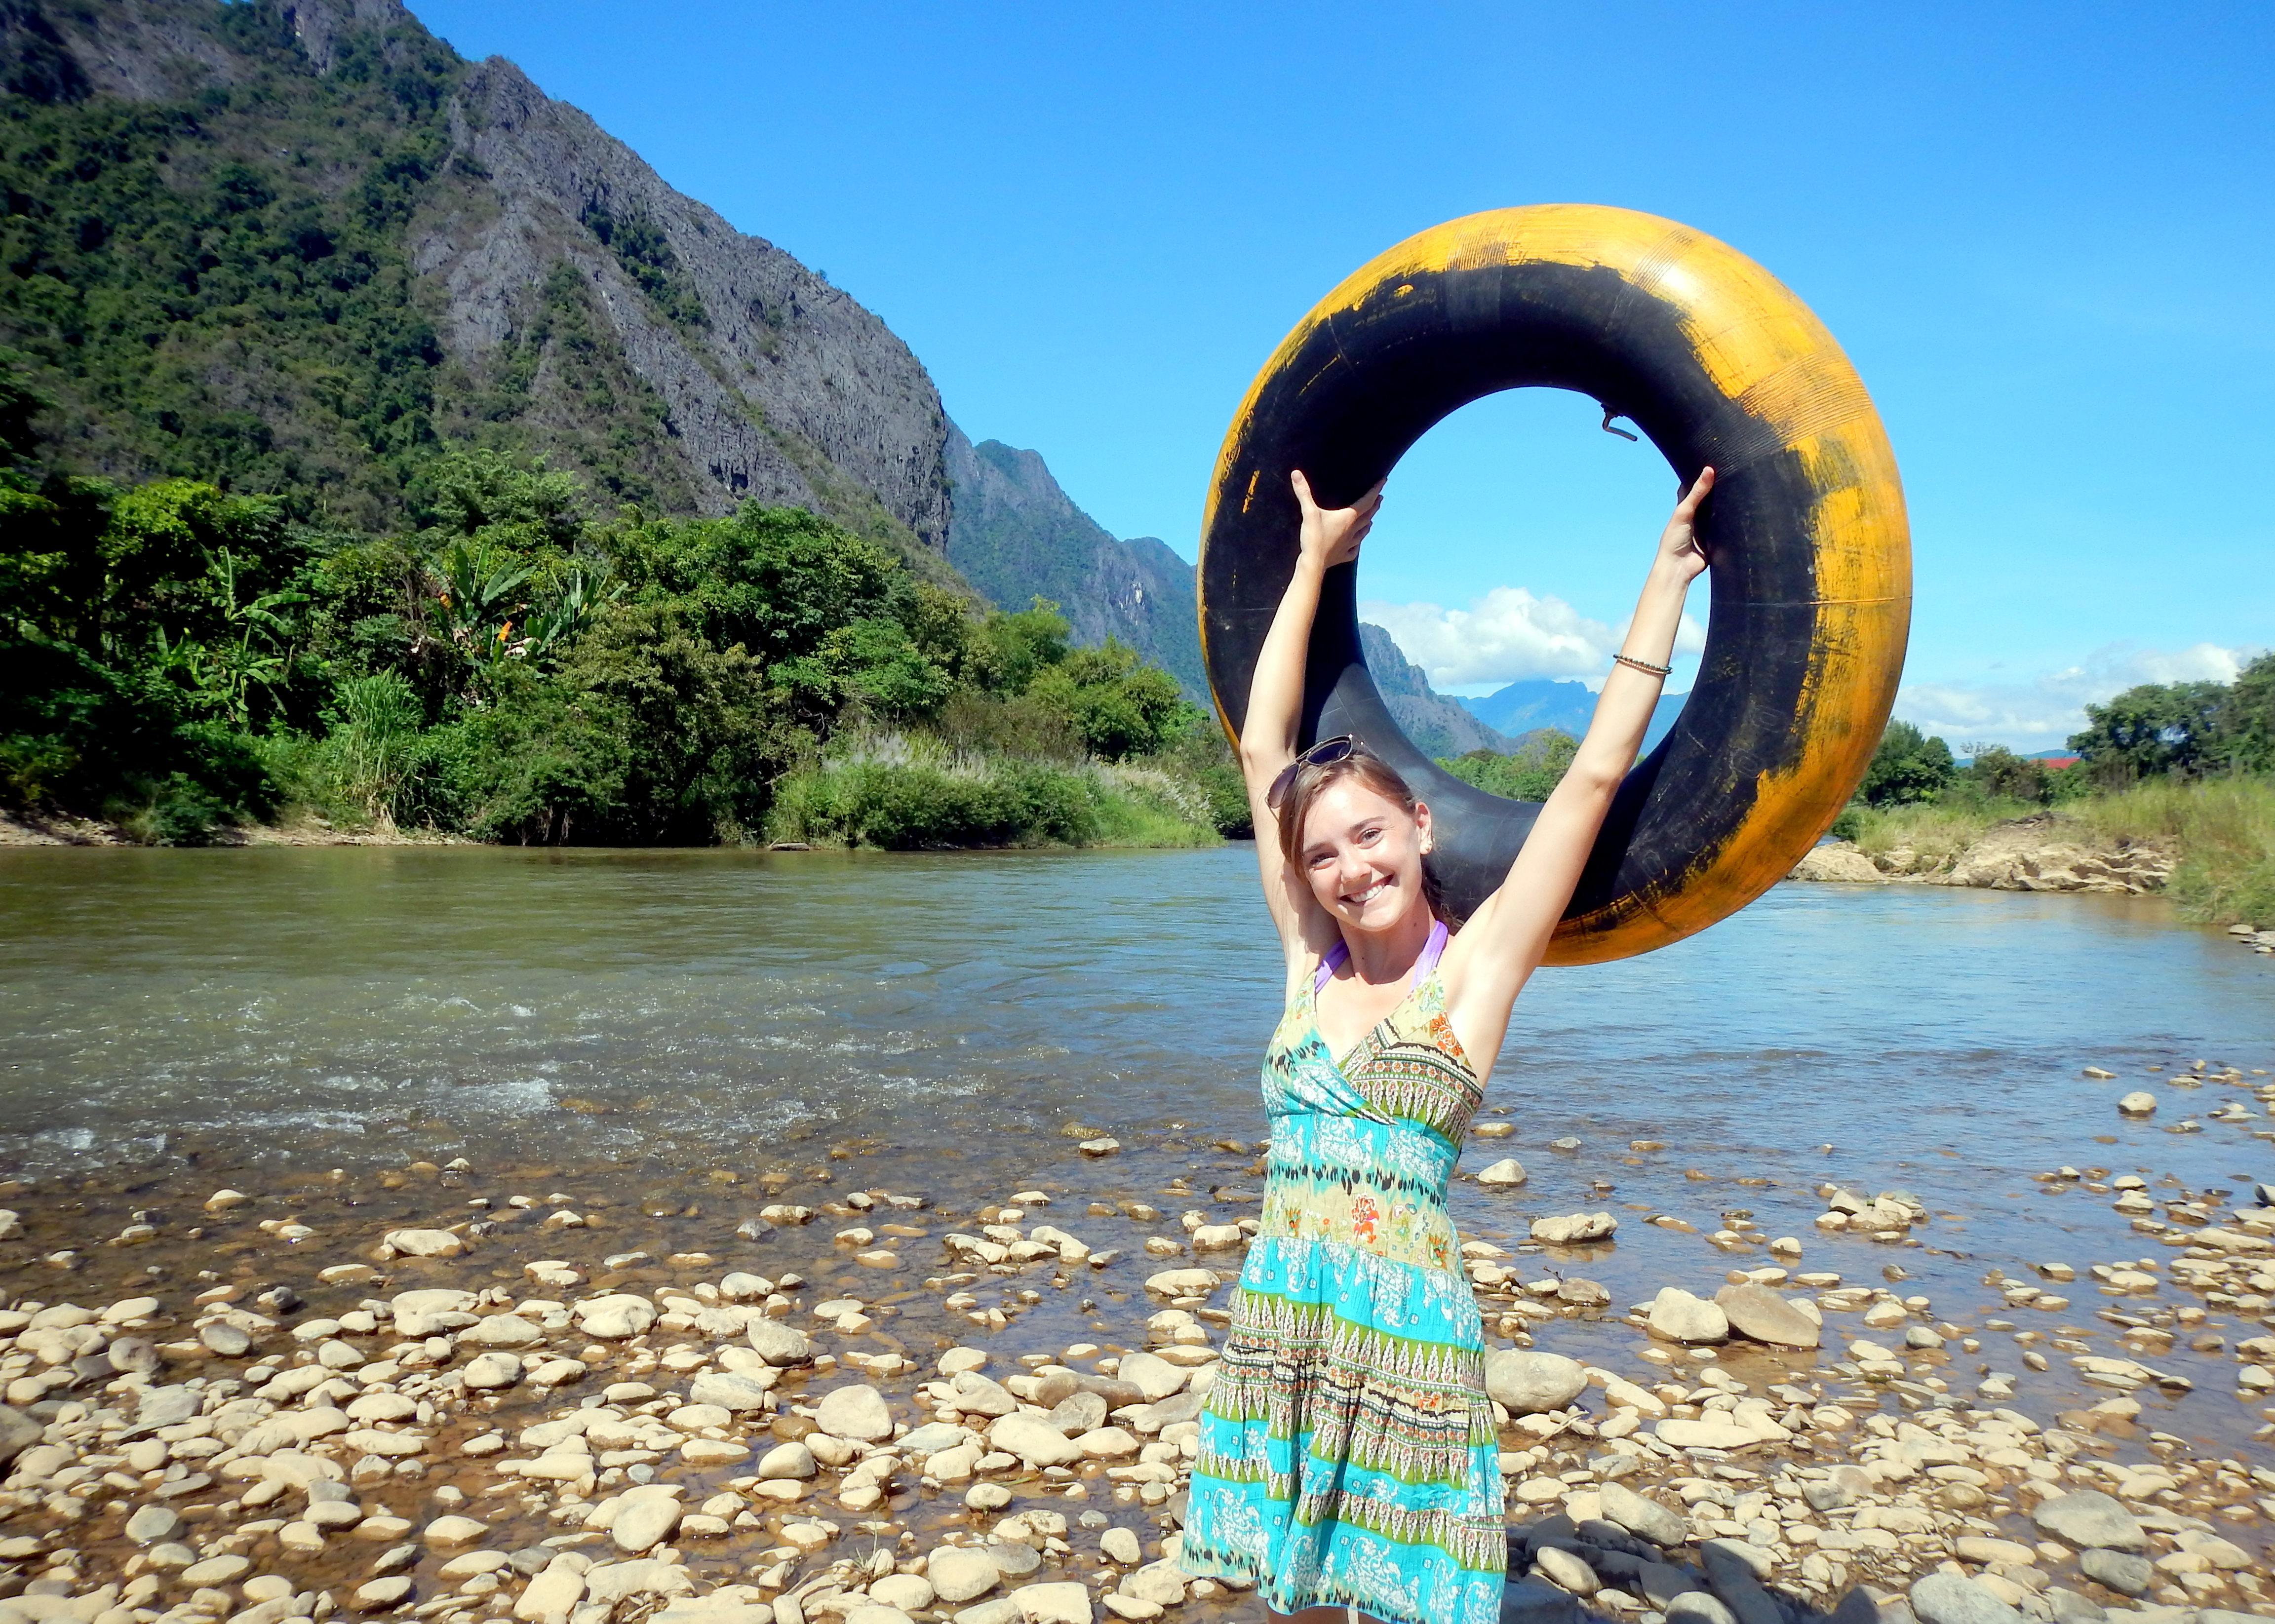 Floating the Nam Song River in Vang Vieng Laos